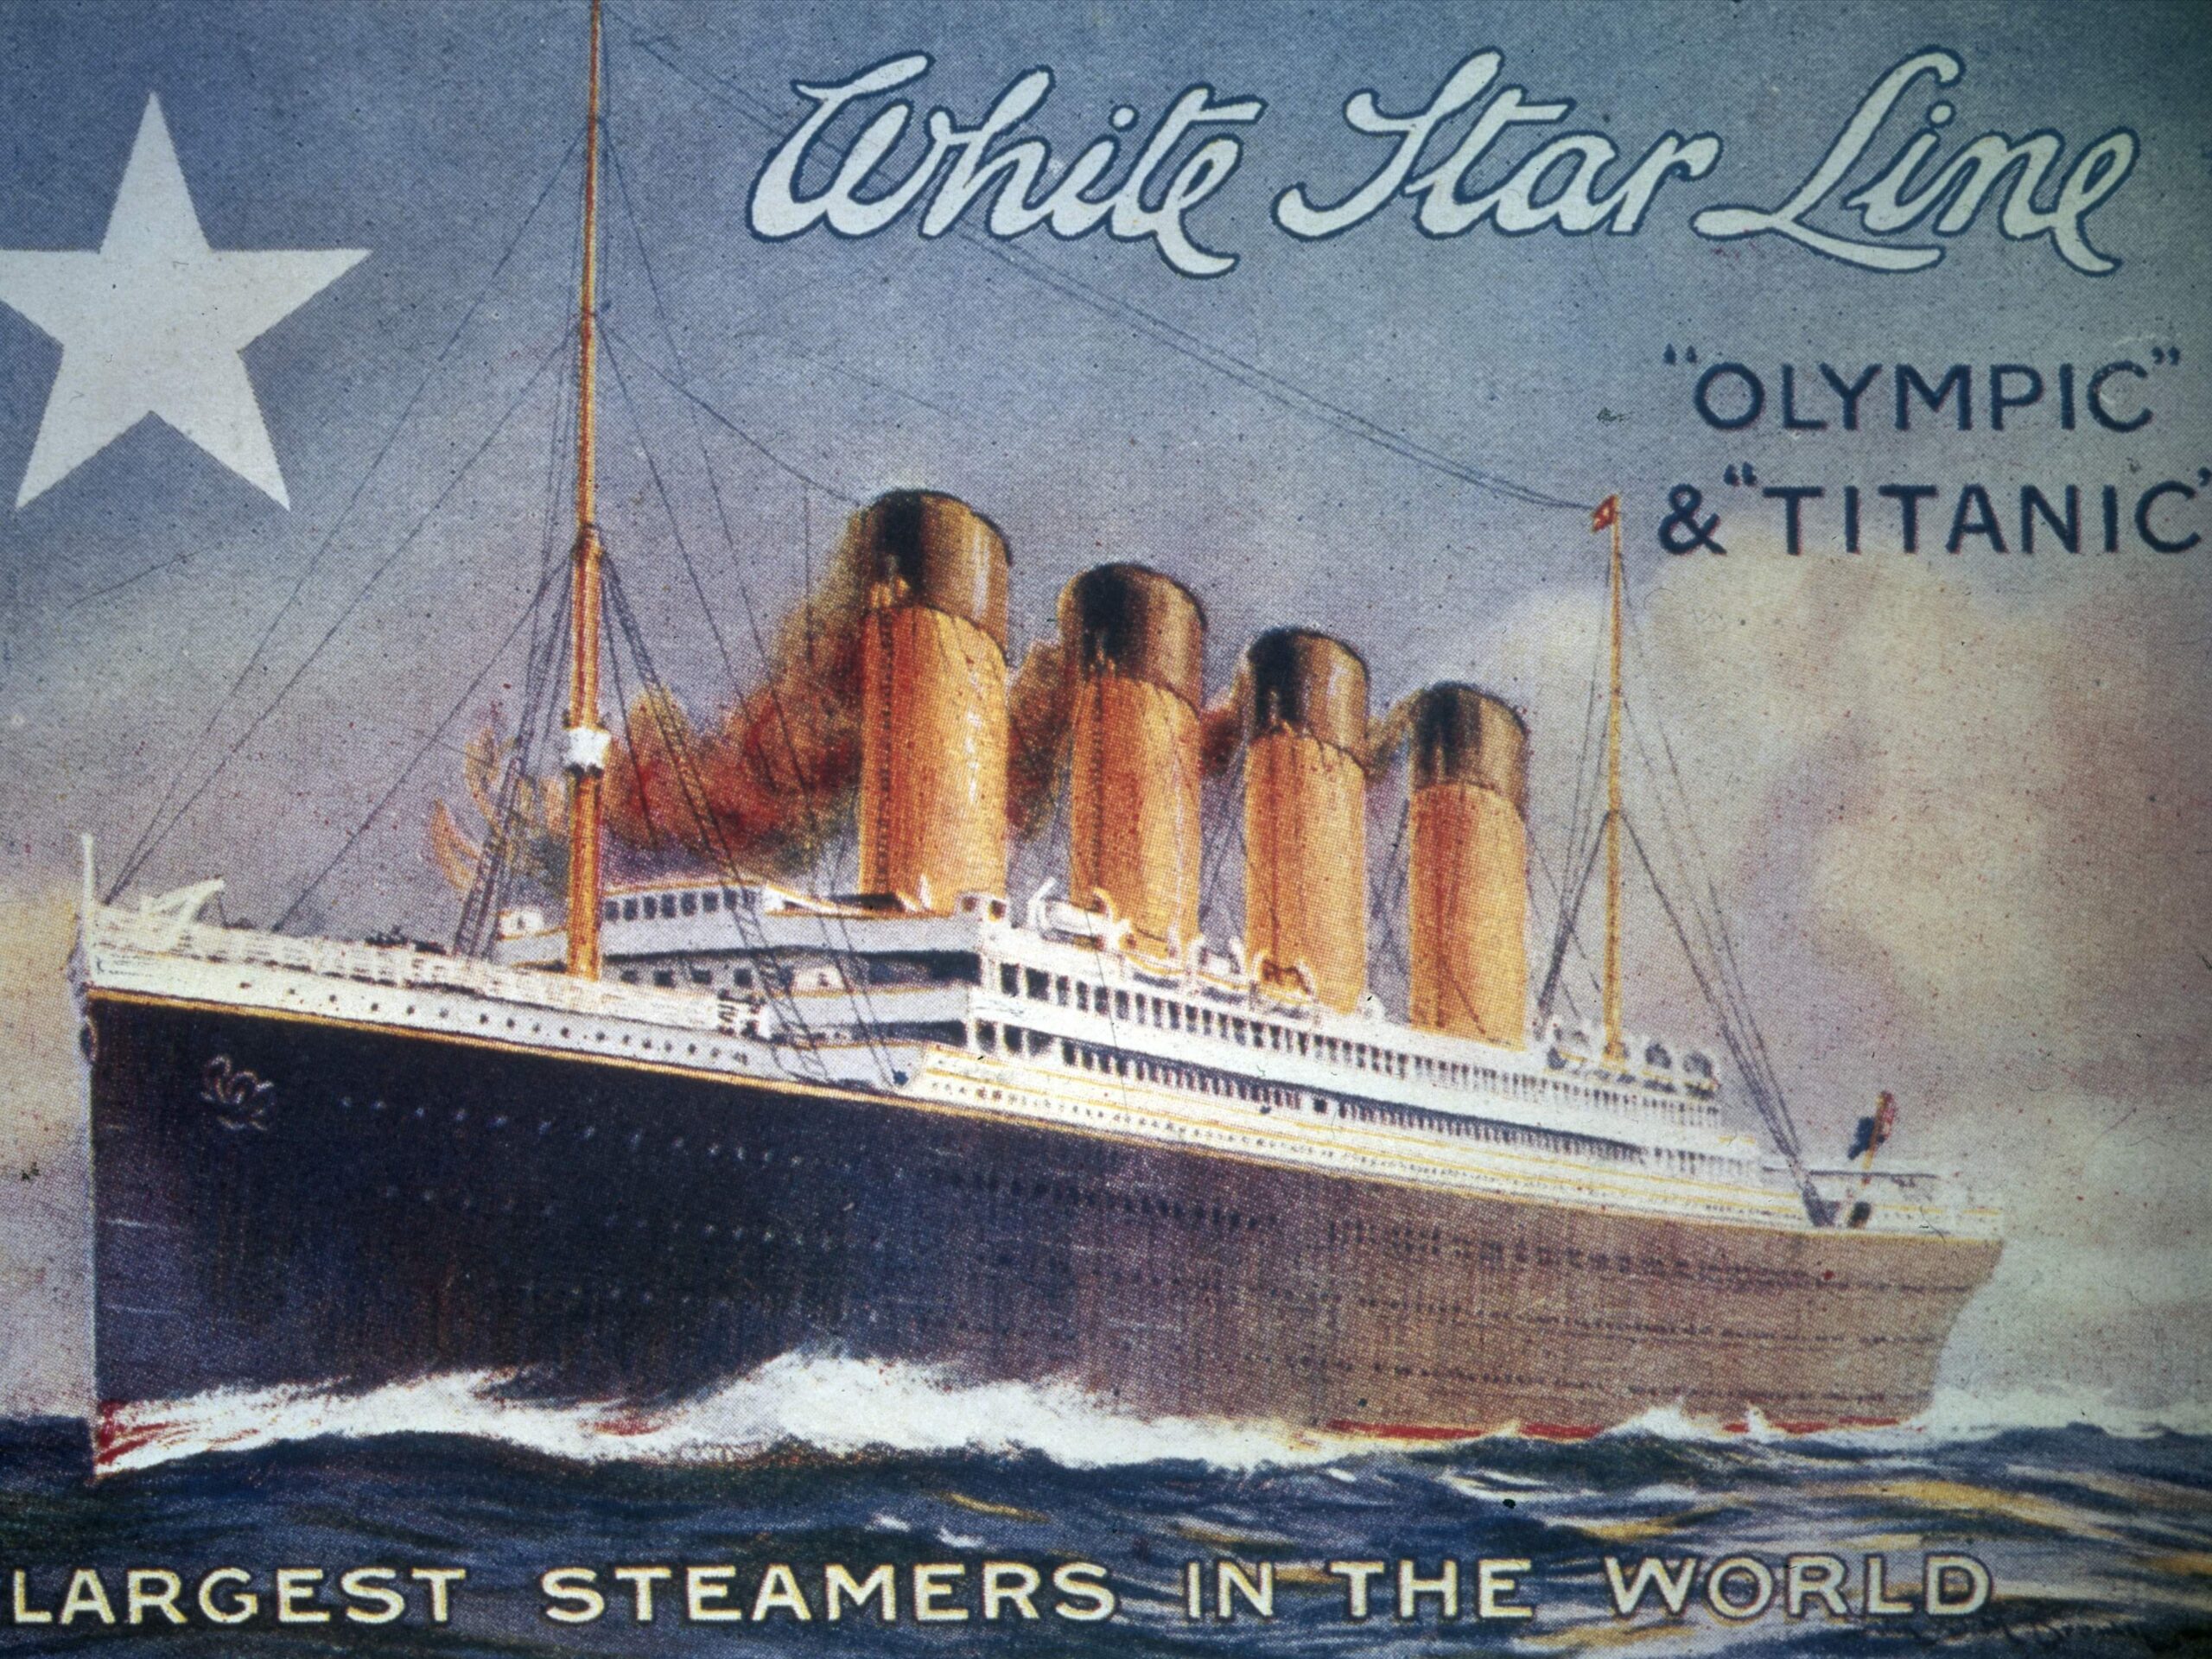 Leaflet of the British White Star Line about the &#39;Olympic&#39; and &#39;Titanic&#39; transatlantic liners, circa 1910.